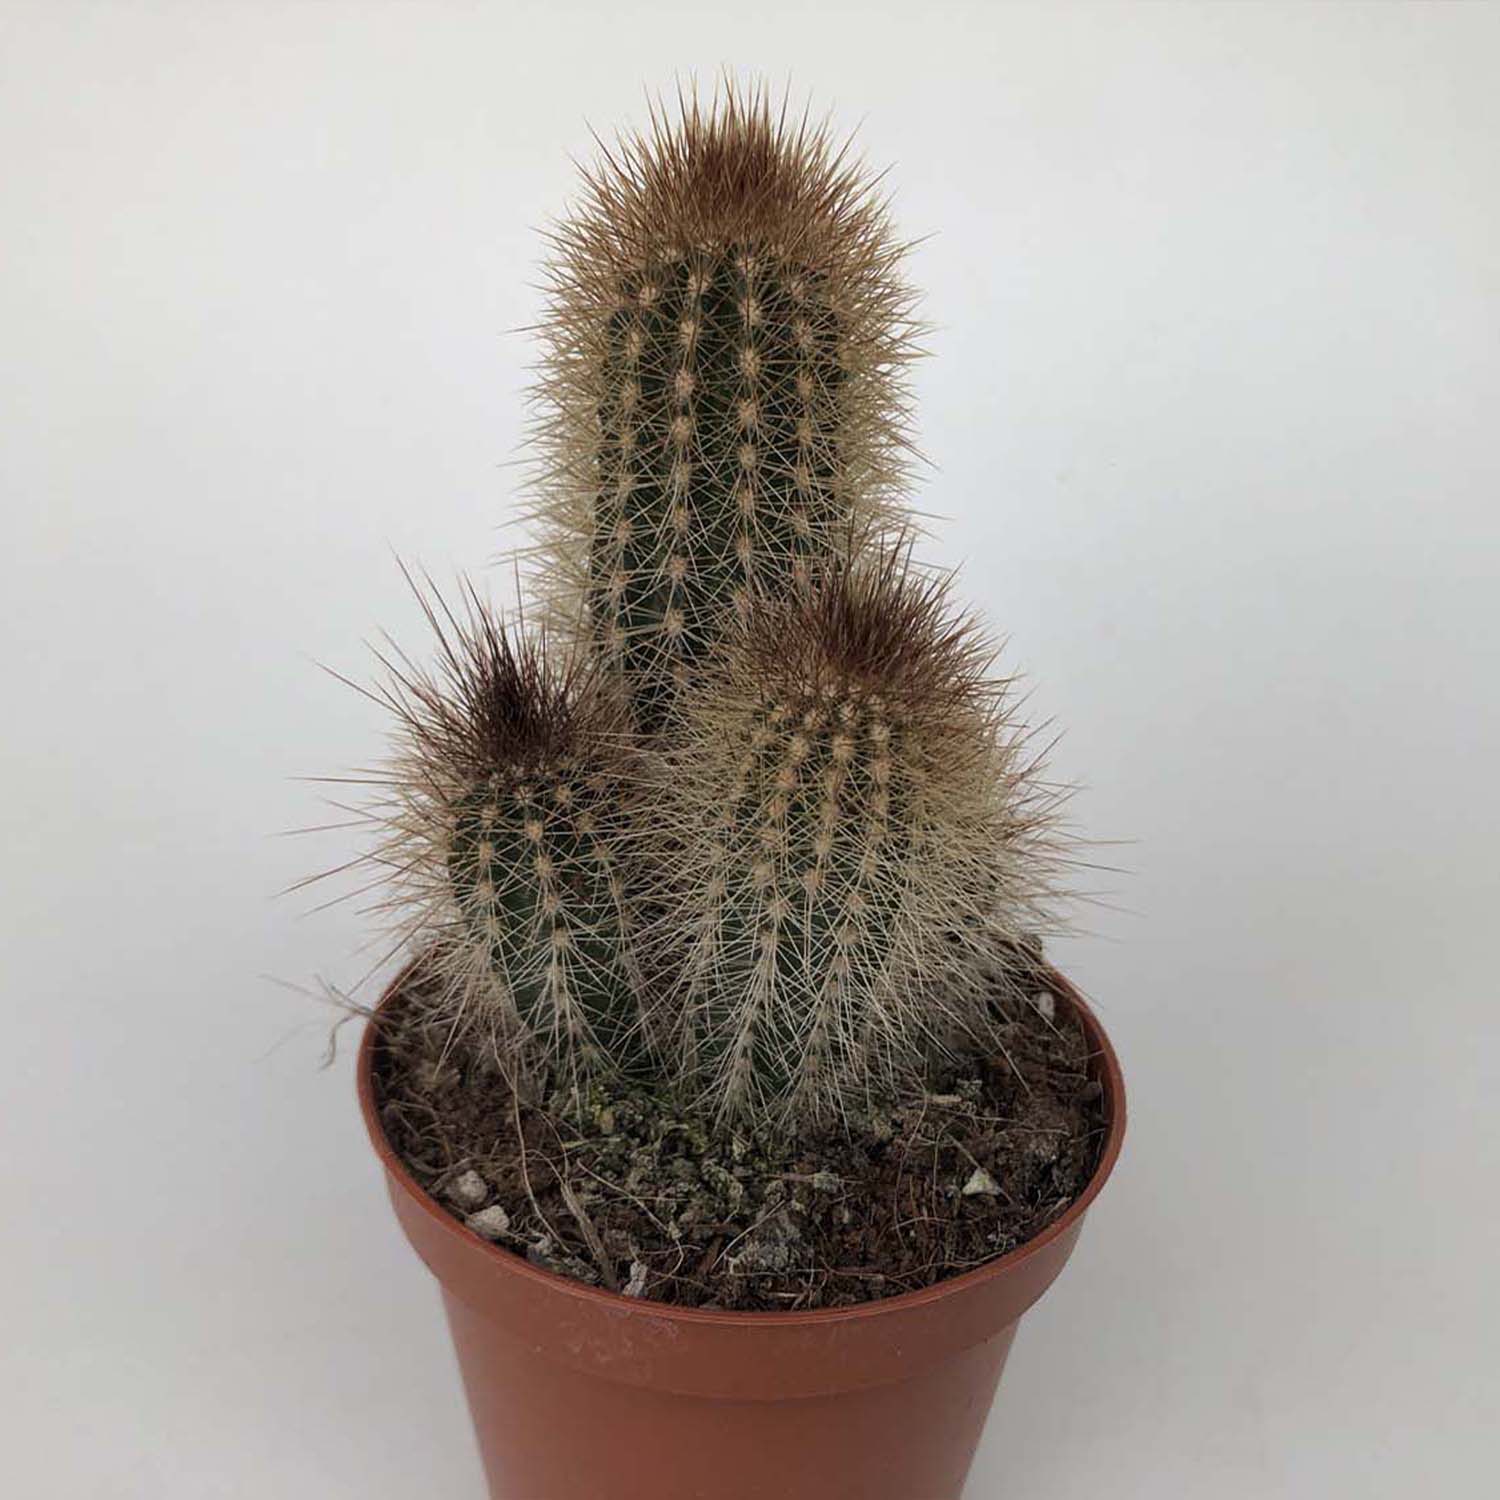 You are currently viewing Pilosocereus piauhyensis